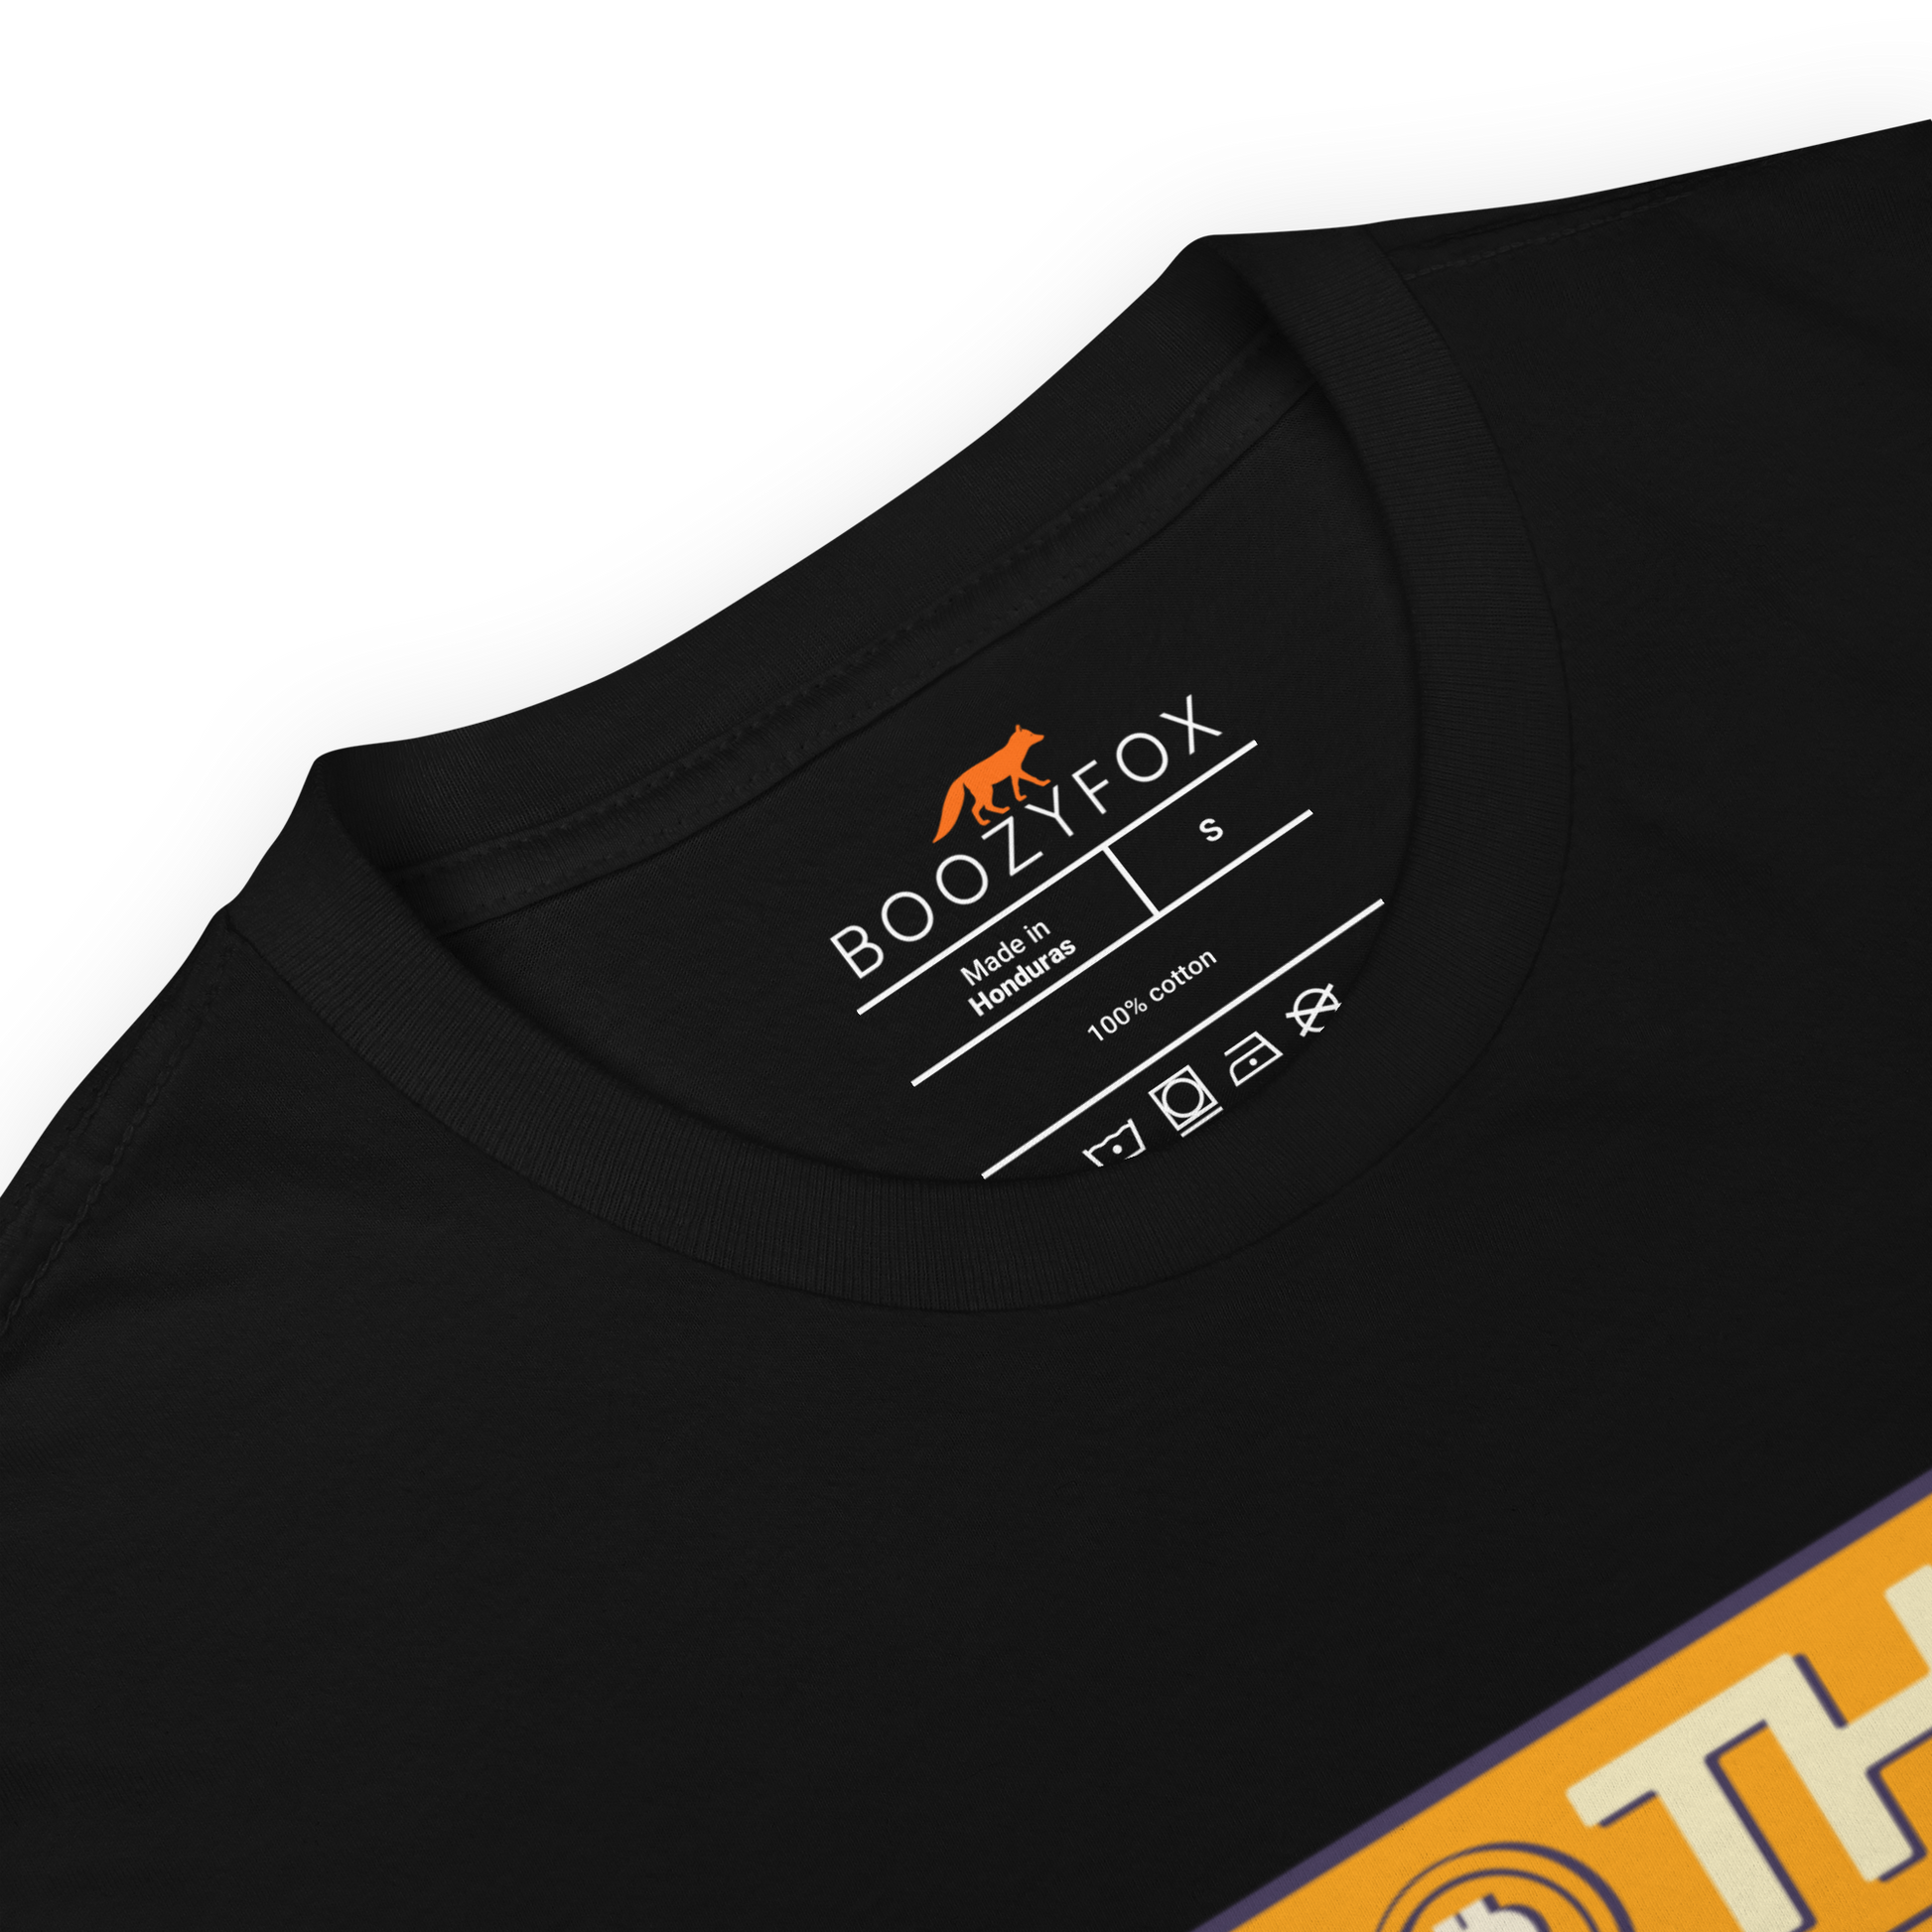 Product details of a Black Bitcoin T-Shirt featuring a funny To The Moon graphic on the chest - Cool Graphic Bitcoin T-Shirts - Boozy Fox